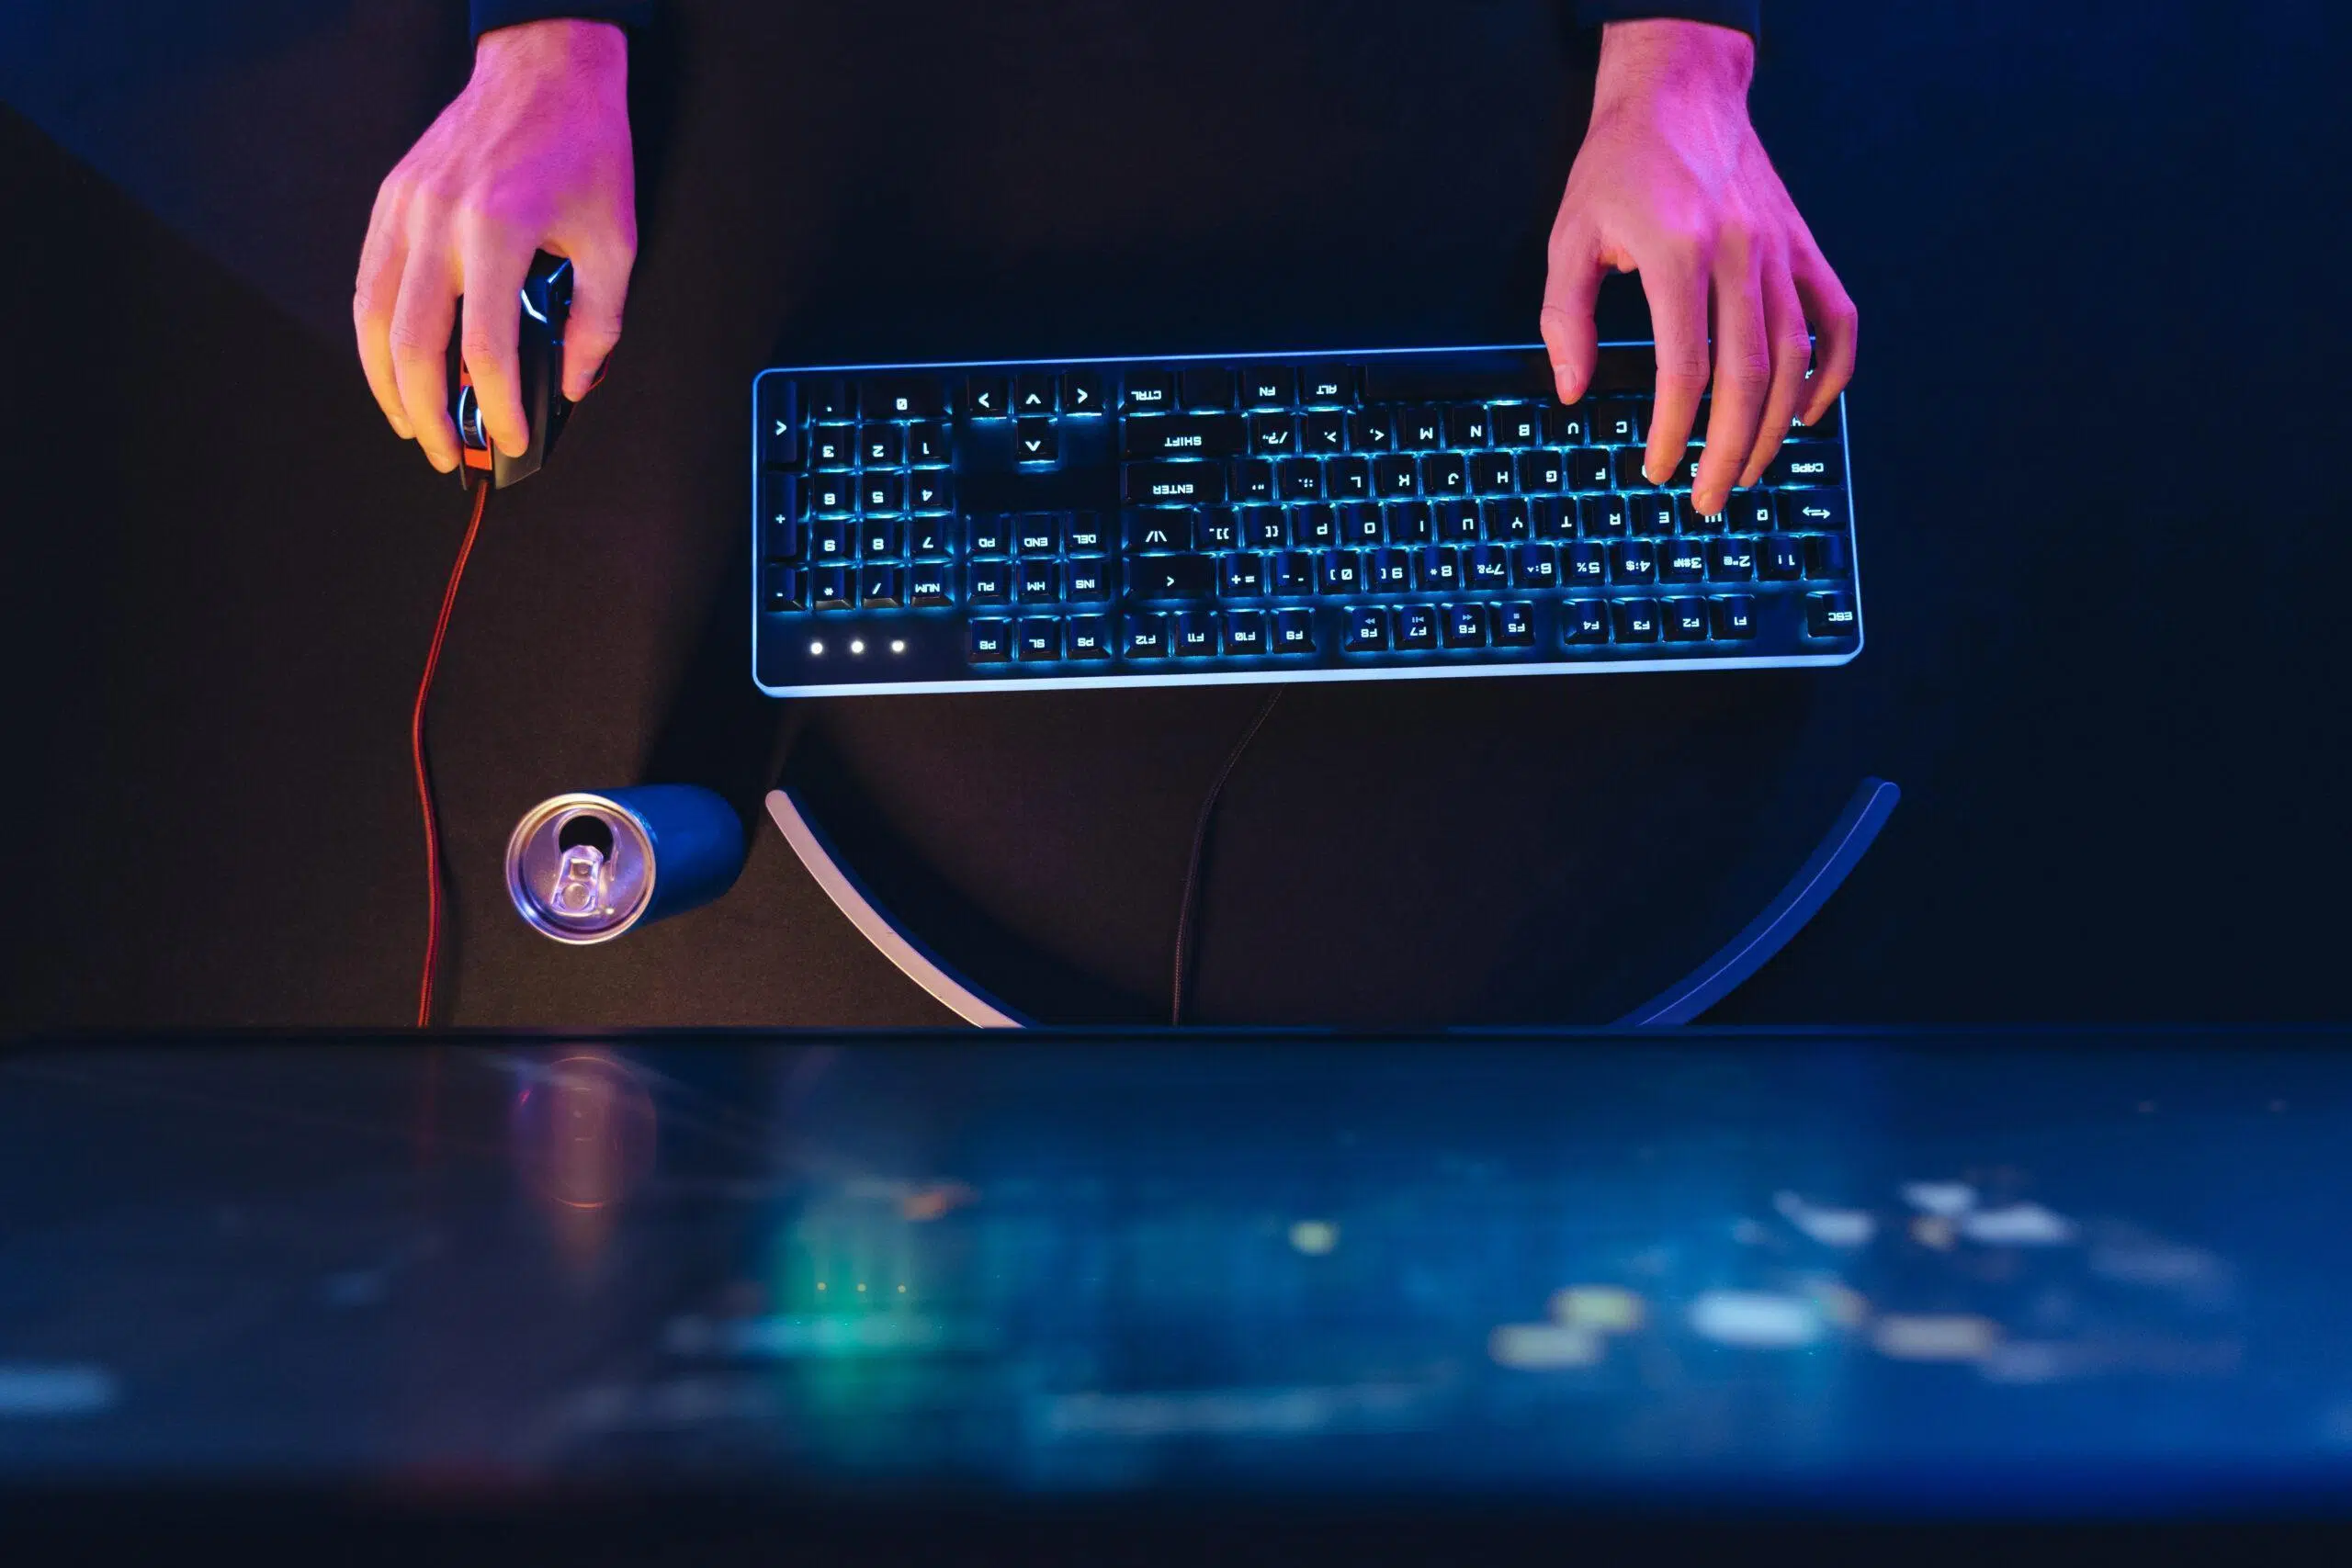 Pro gamer's hands on professional gaming keyboard and computer mouse in neon color